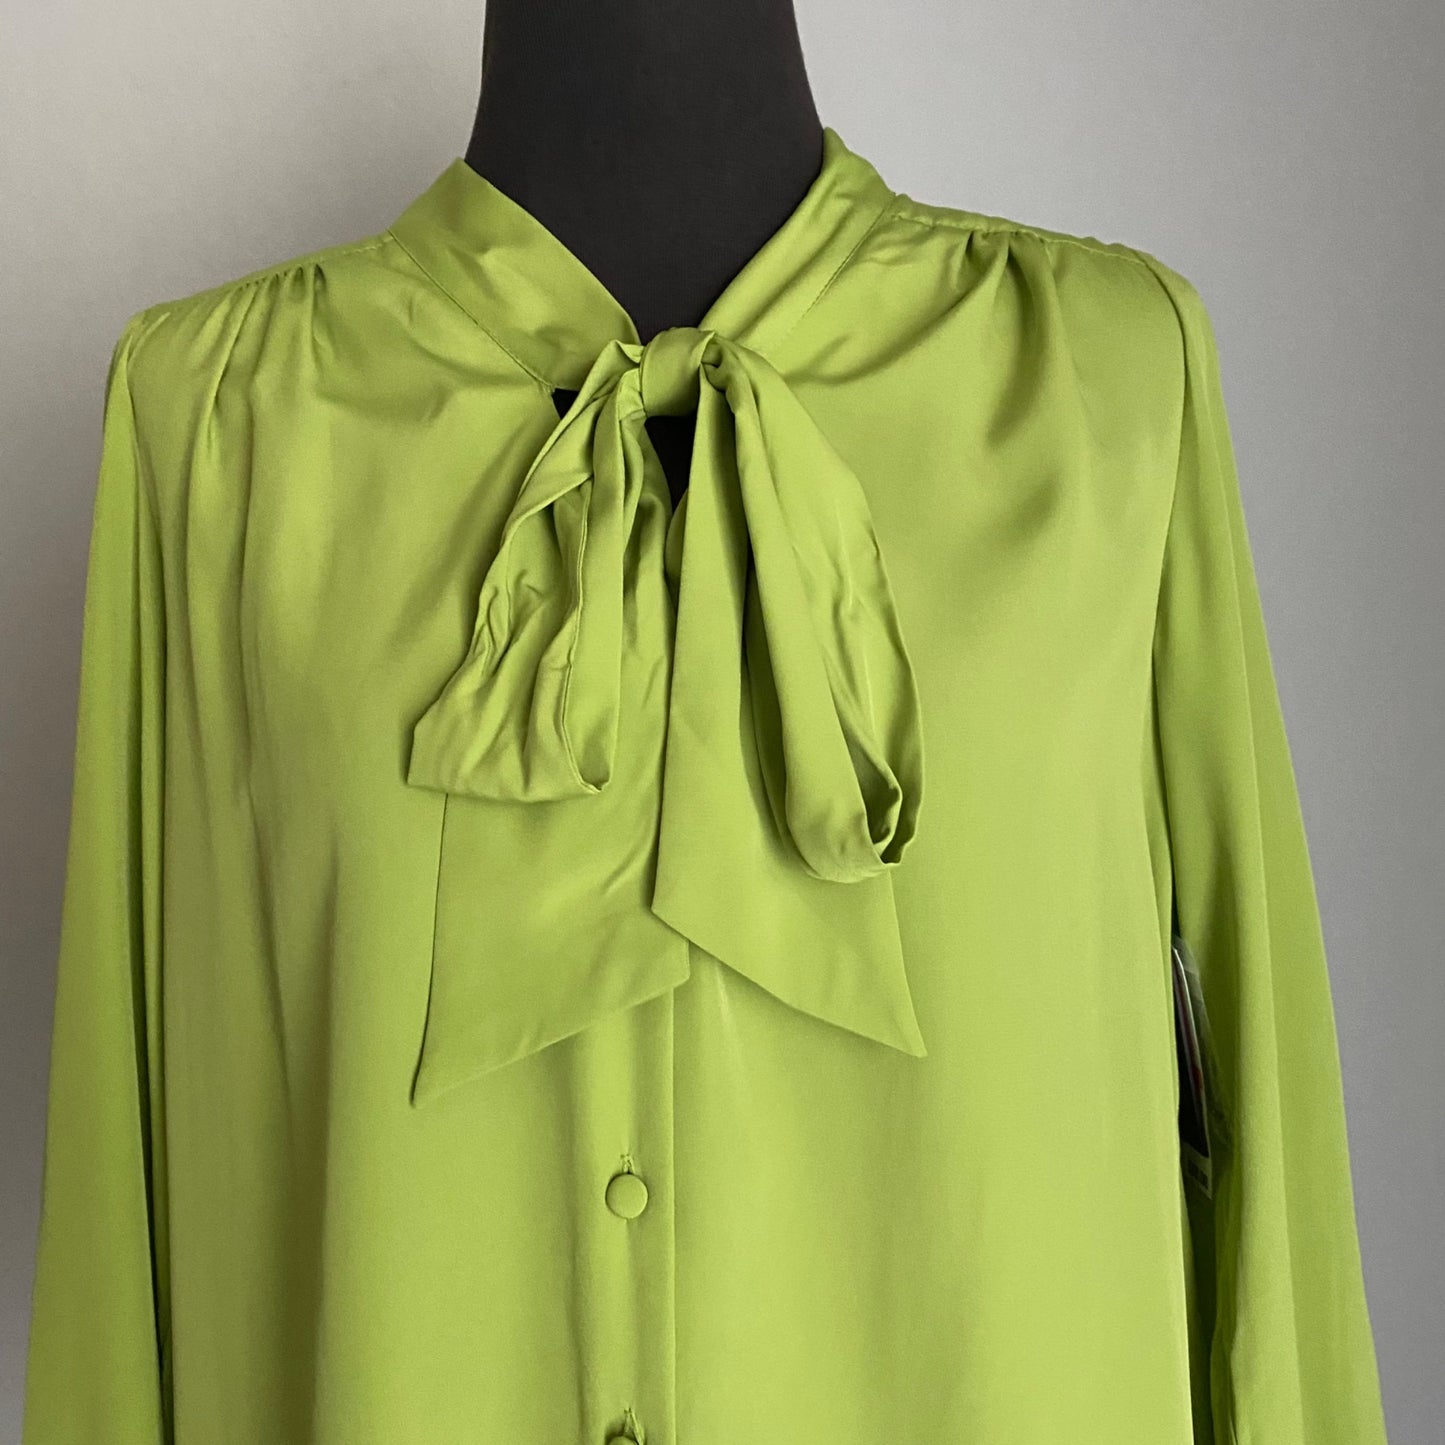 Vince Camuto sz S Long sleeve button career office tie blouse